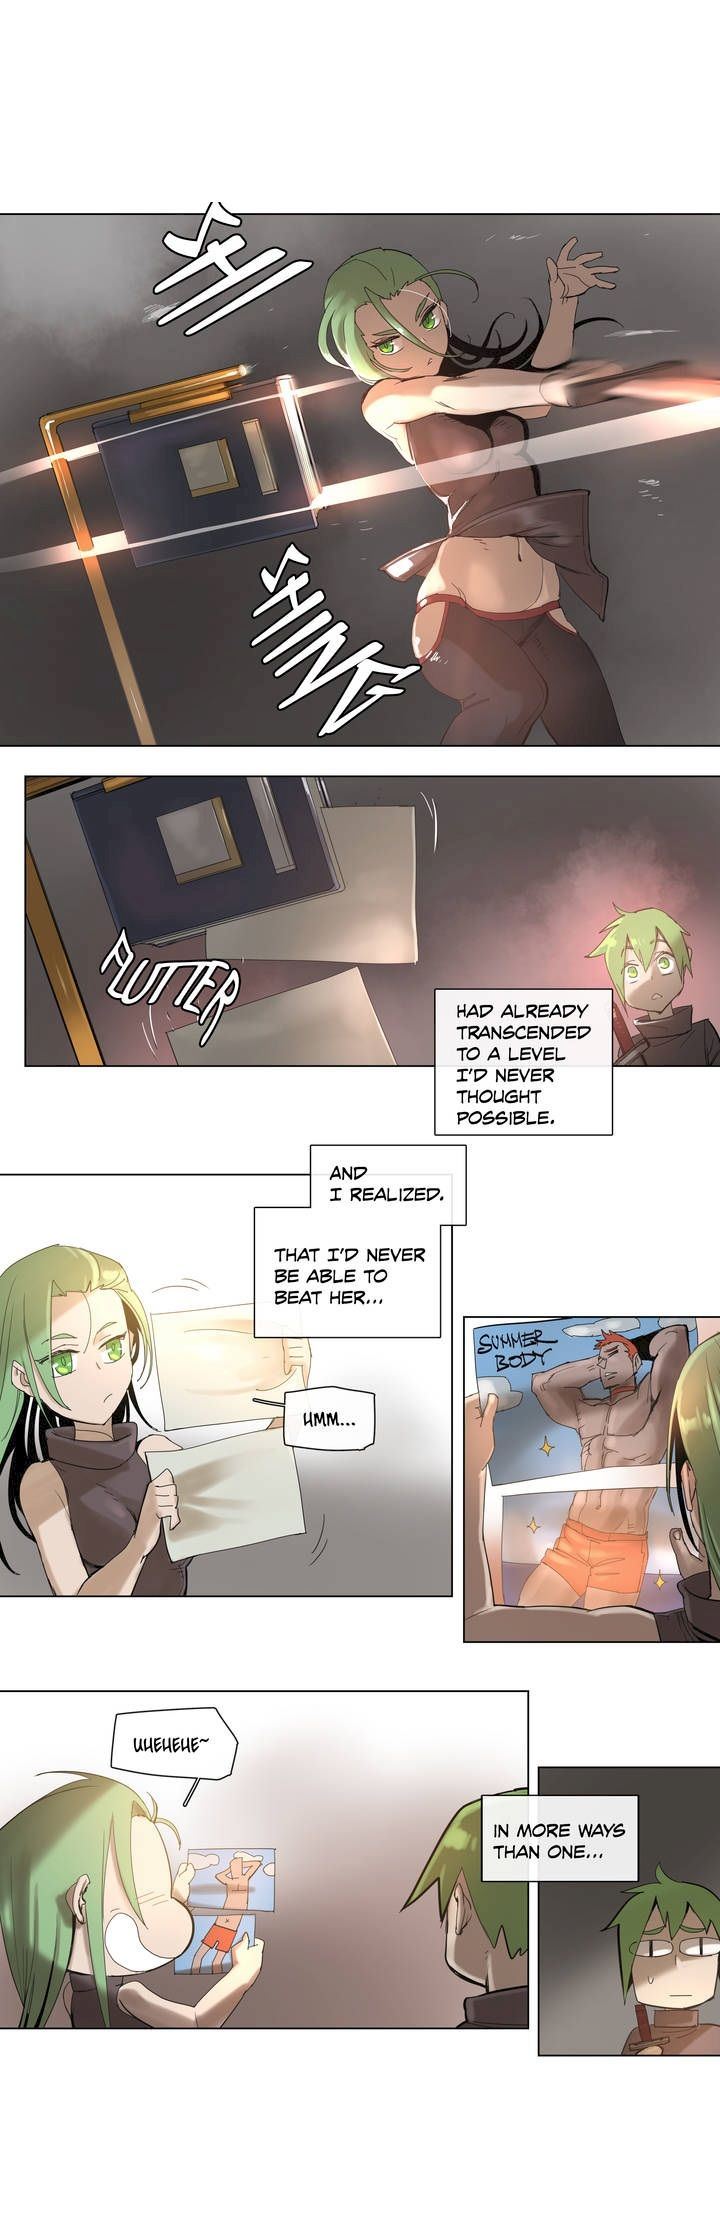 4 Cut Hero - Chapter 43 Page 3